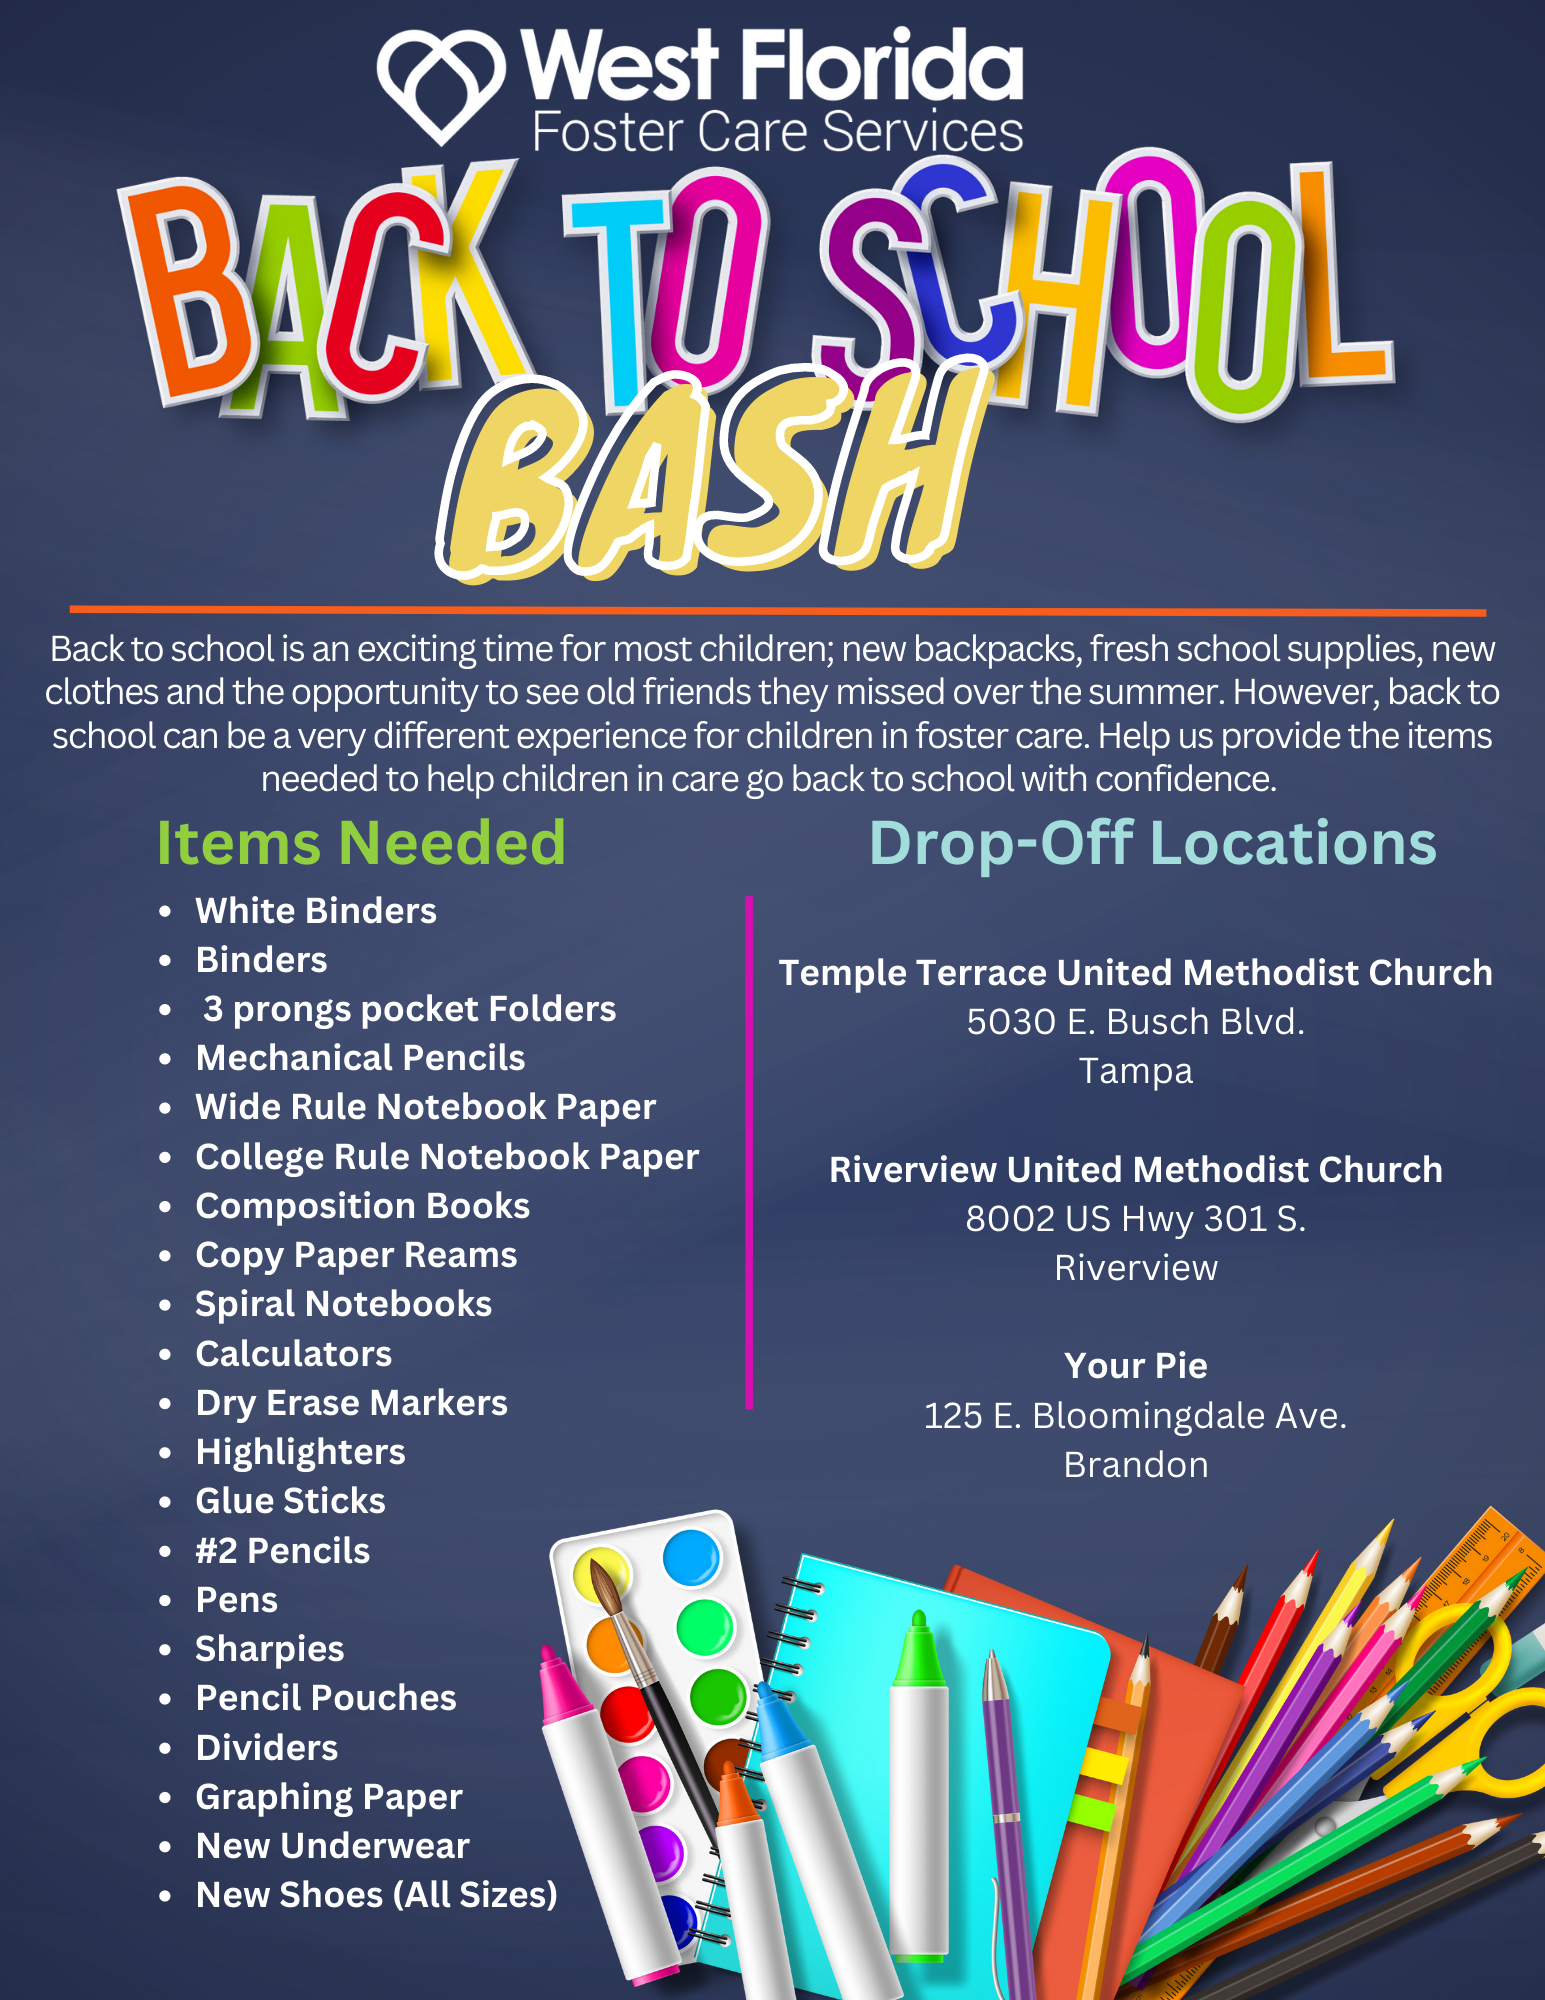 Back to School Bash West Florida Foster Care Services